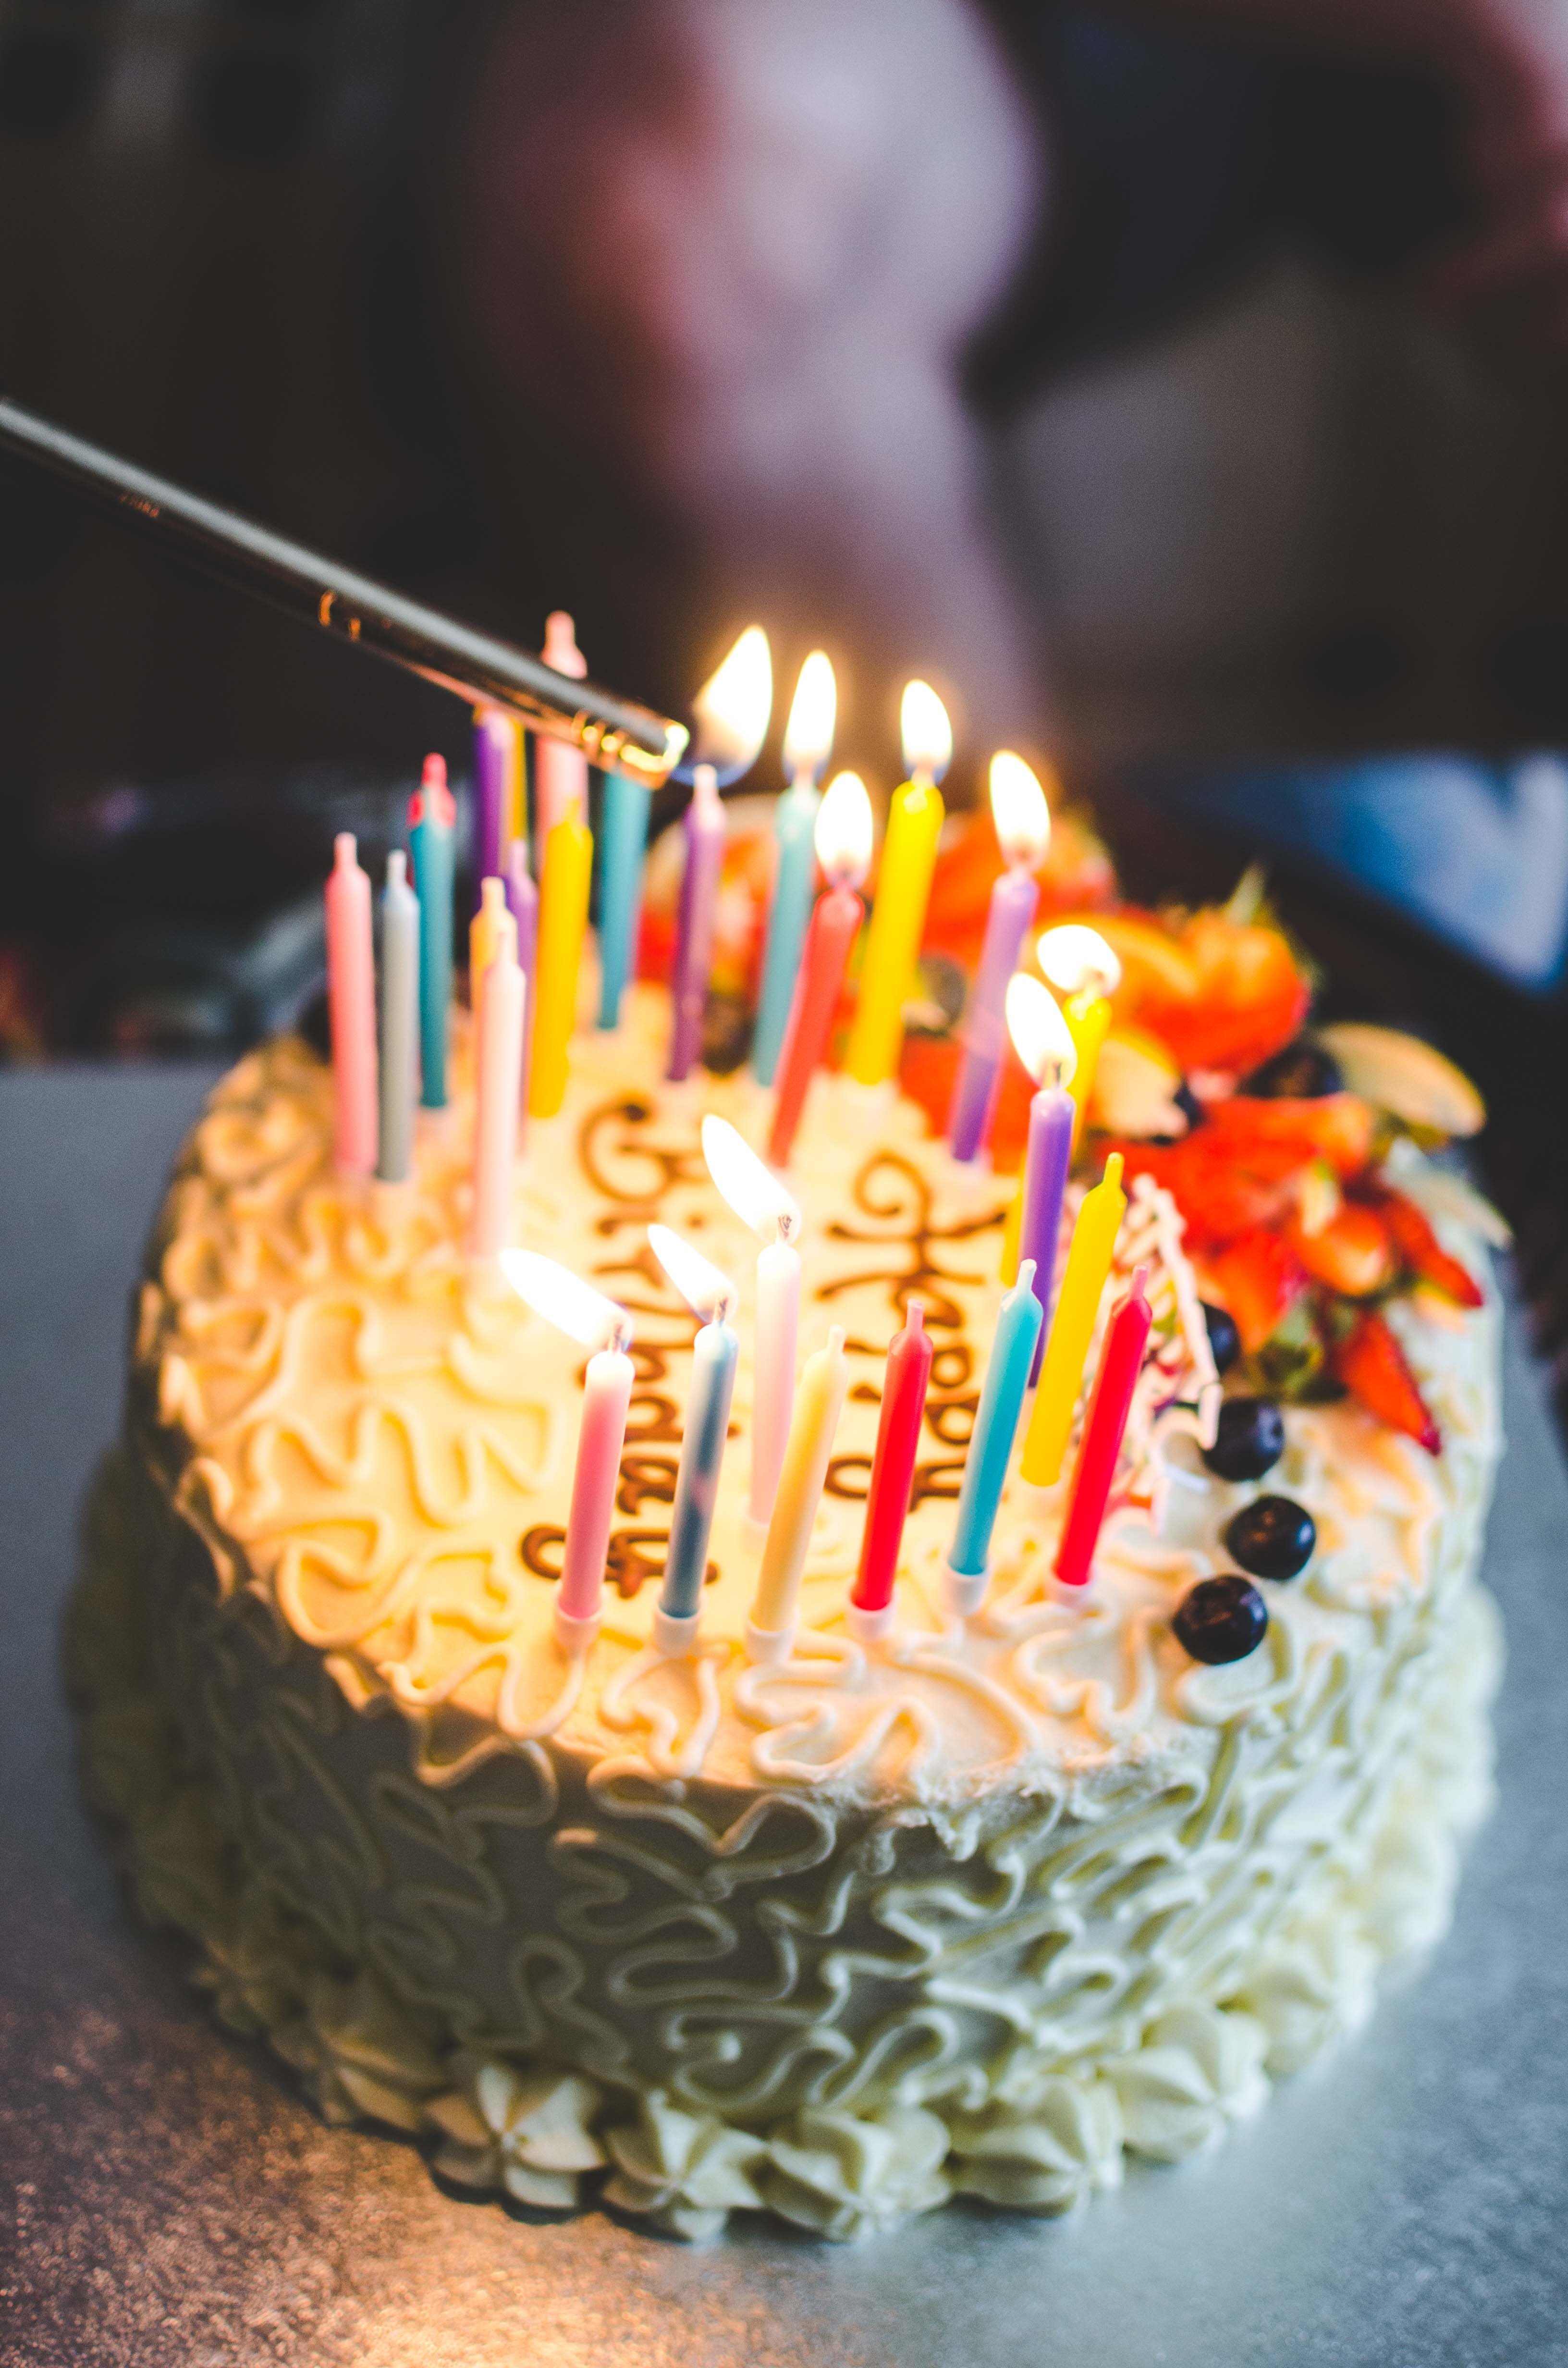 A picture of someone lighting the candles on a birthday cake. | Source: Unsplash